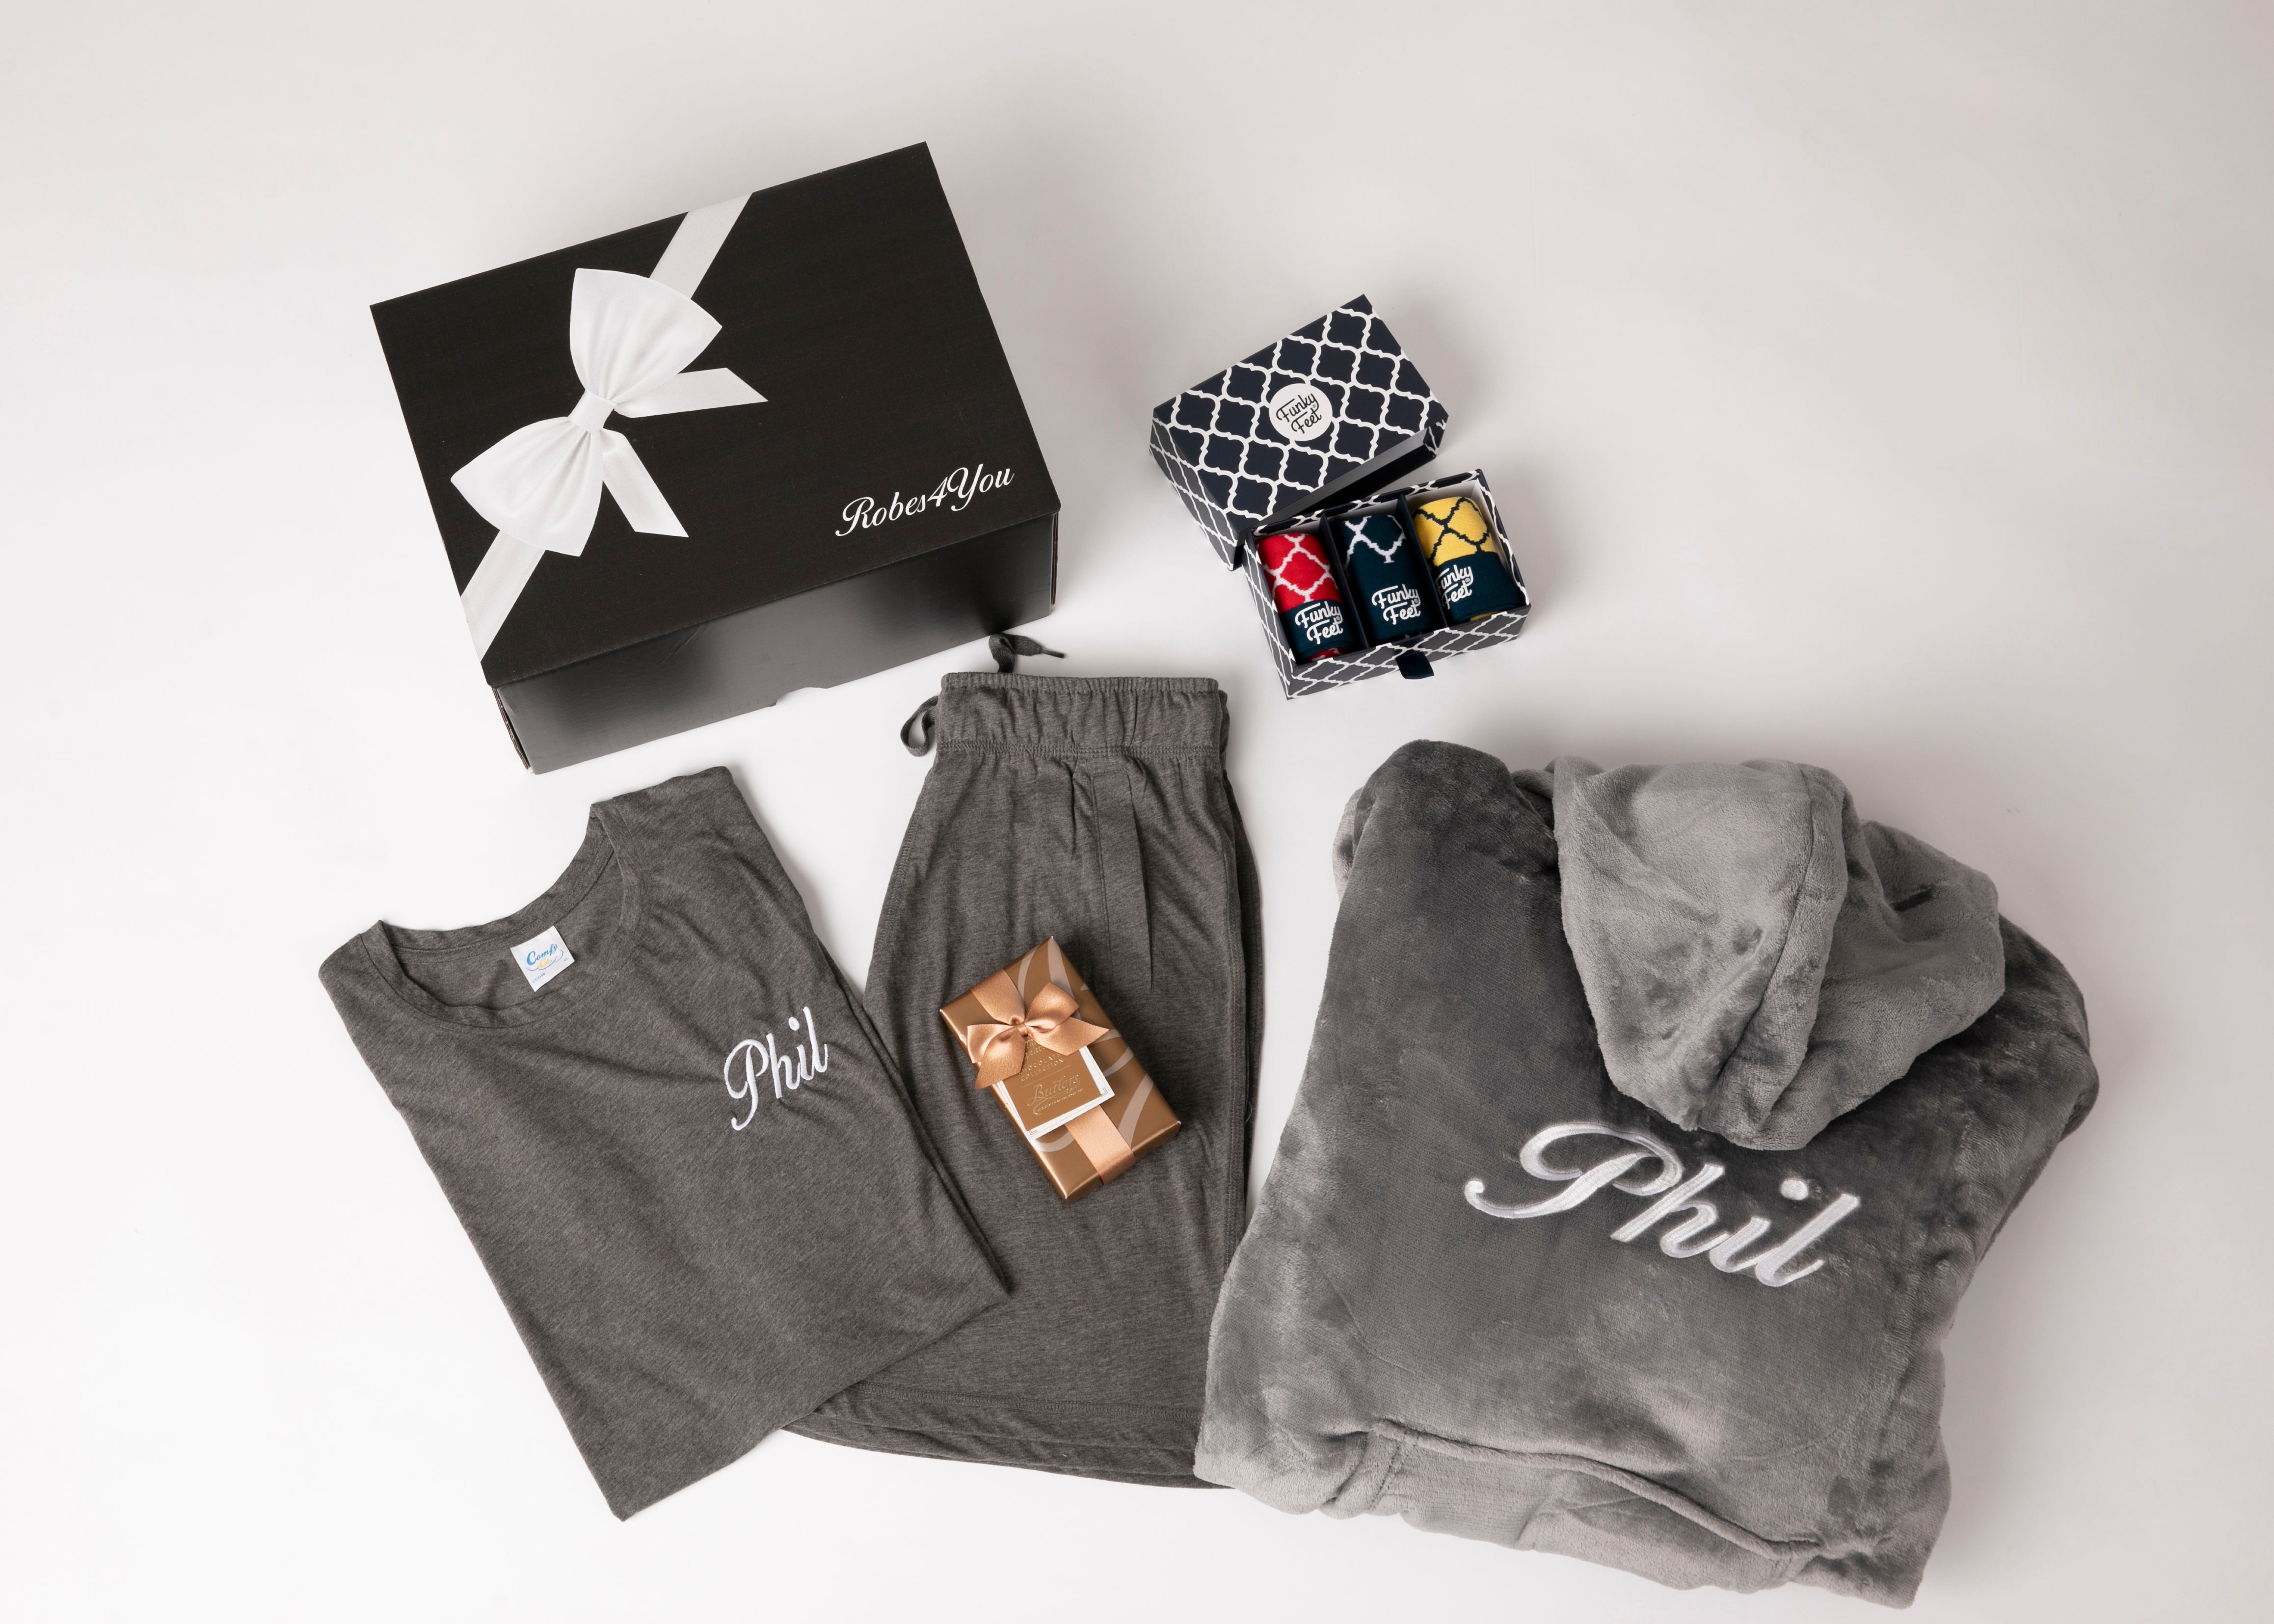 Soft Luxurious Oversized Hoodes with Grey cotton pyjamas with chocolates and socks presented in a gift box